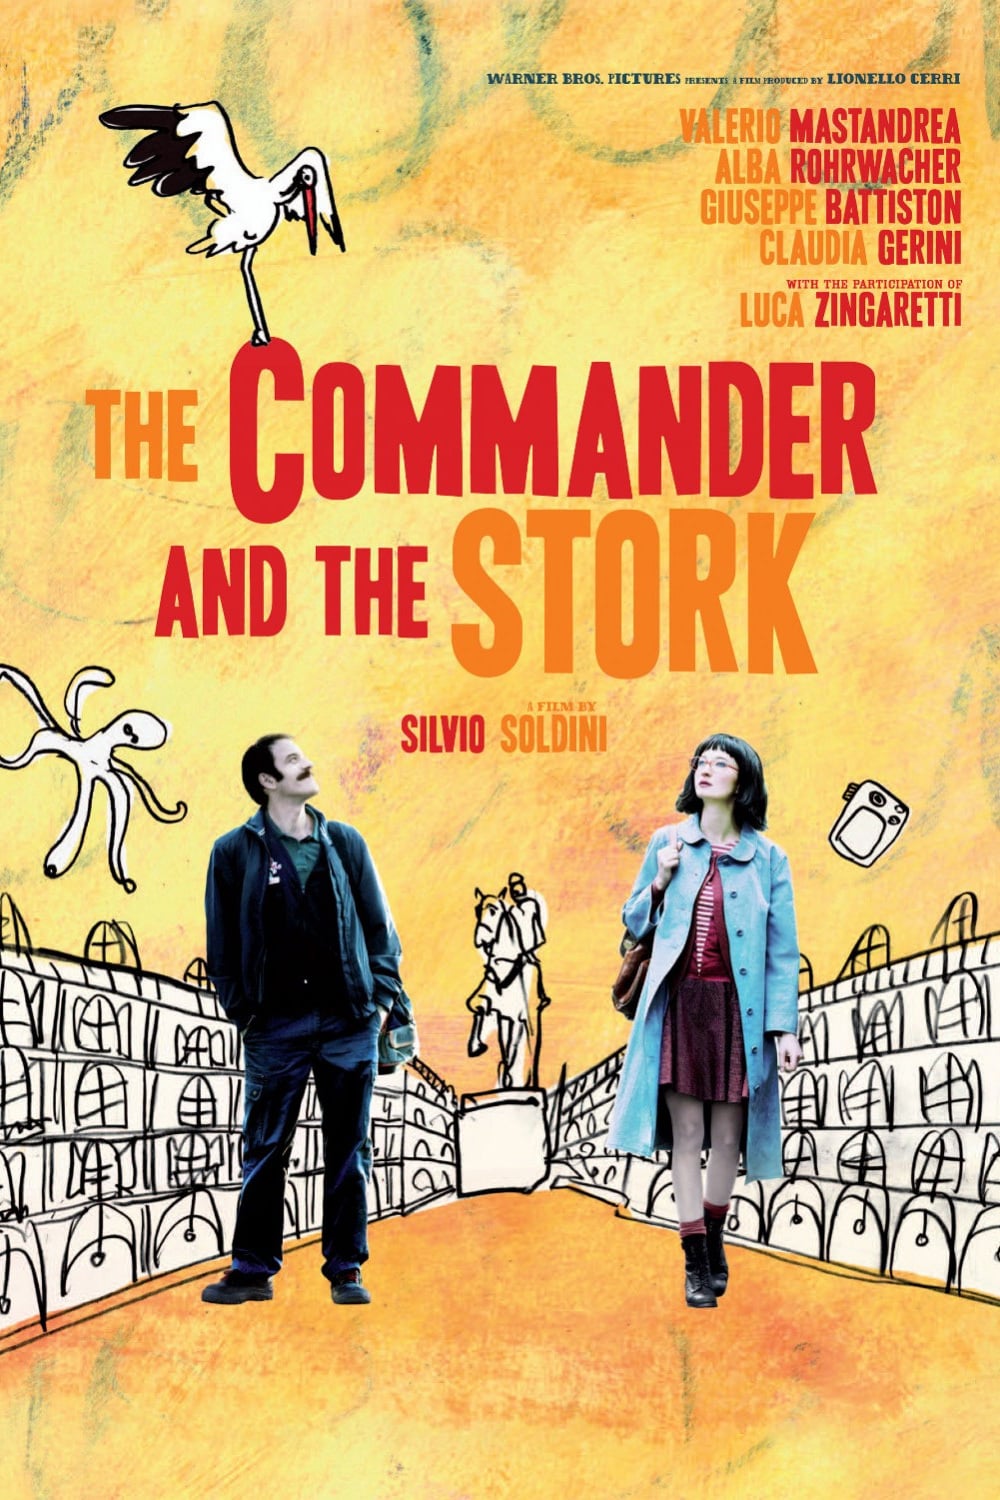 The Commander and the Stork